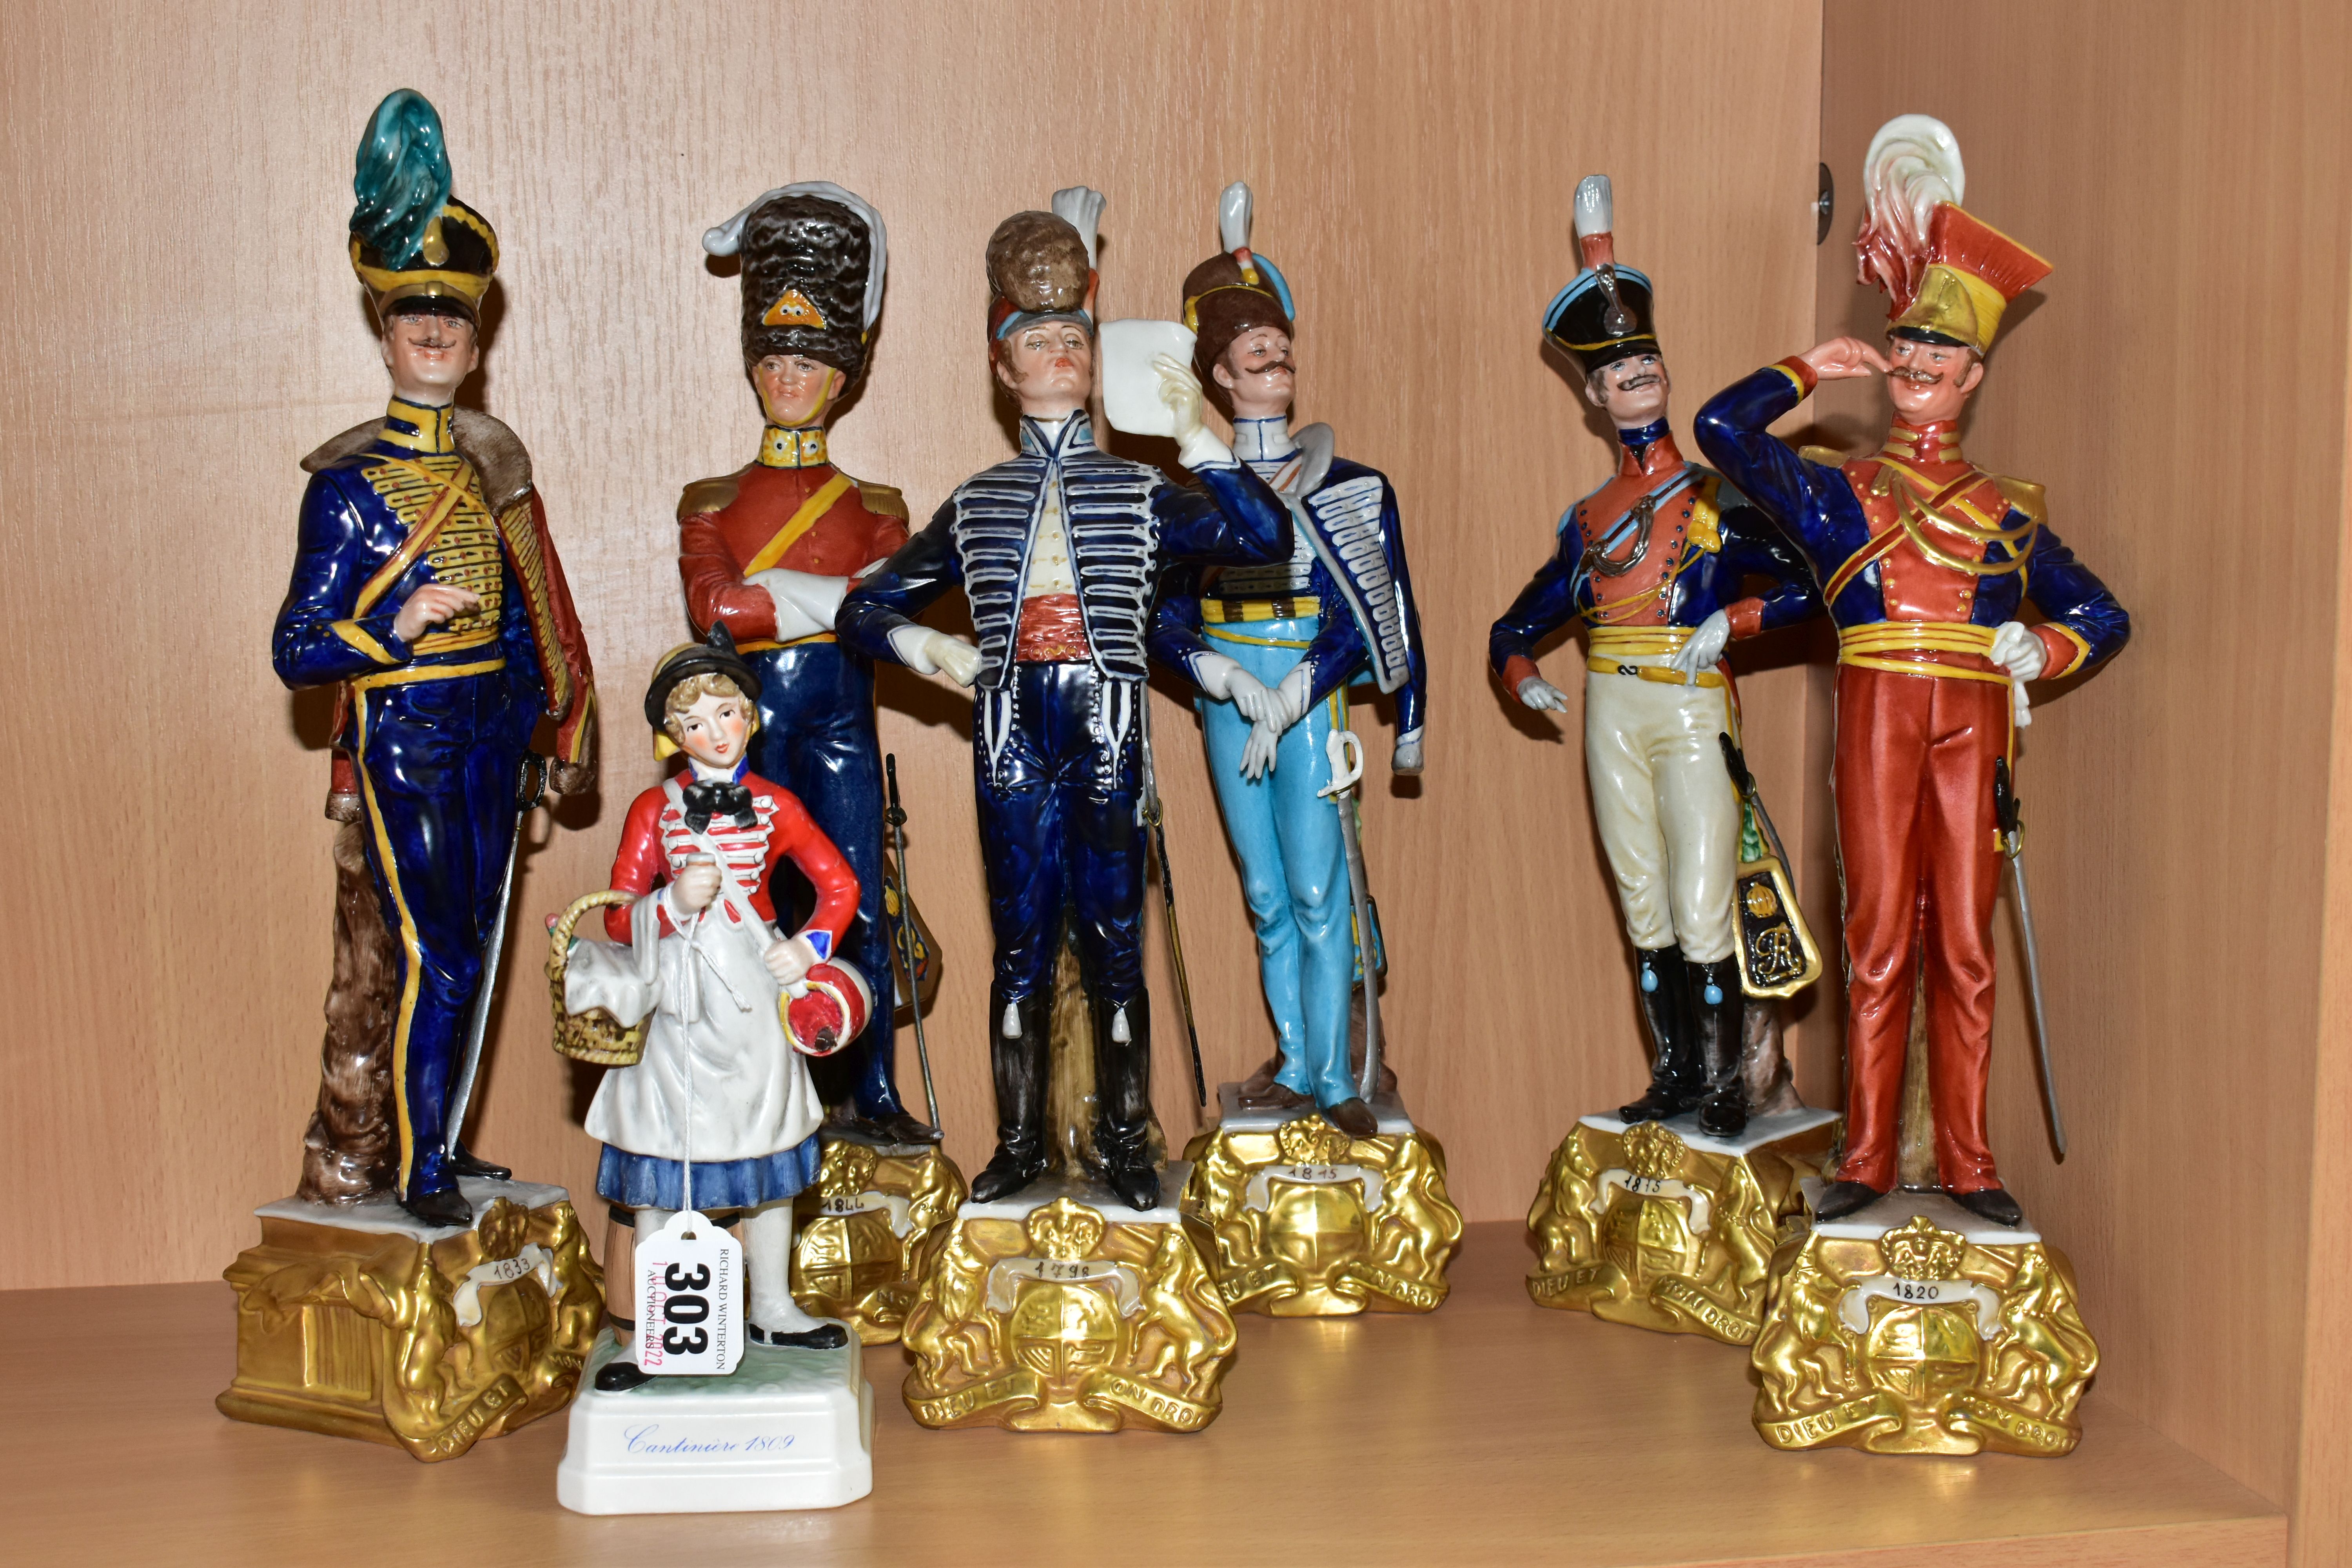 SIX CAPODIMONTE BRUNO MERLI FIGURES OF SOLDIERS IN HISTORICAL COSTUME OF 1798-1844 AND A GOEBEL